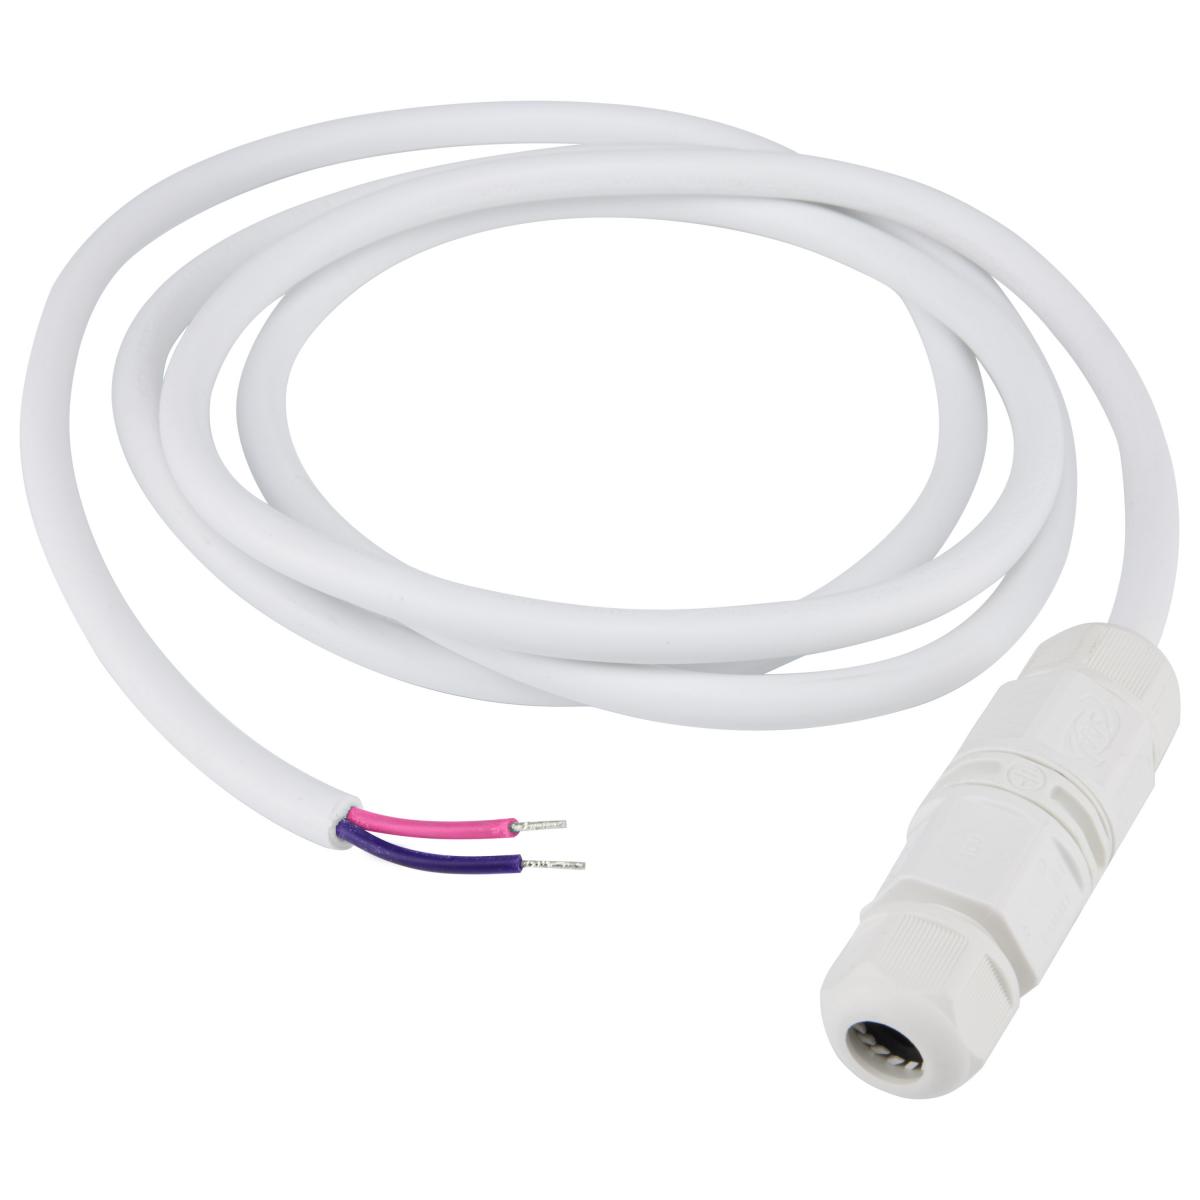 65-170 IP68 CONNECTOR WITH 5.5FT WHIP